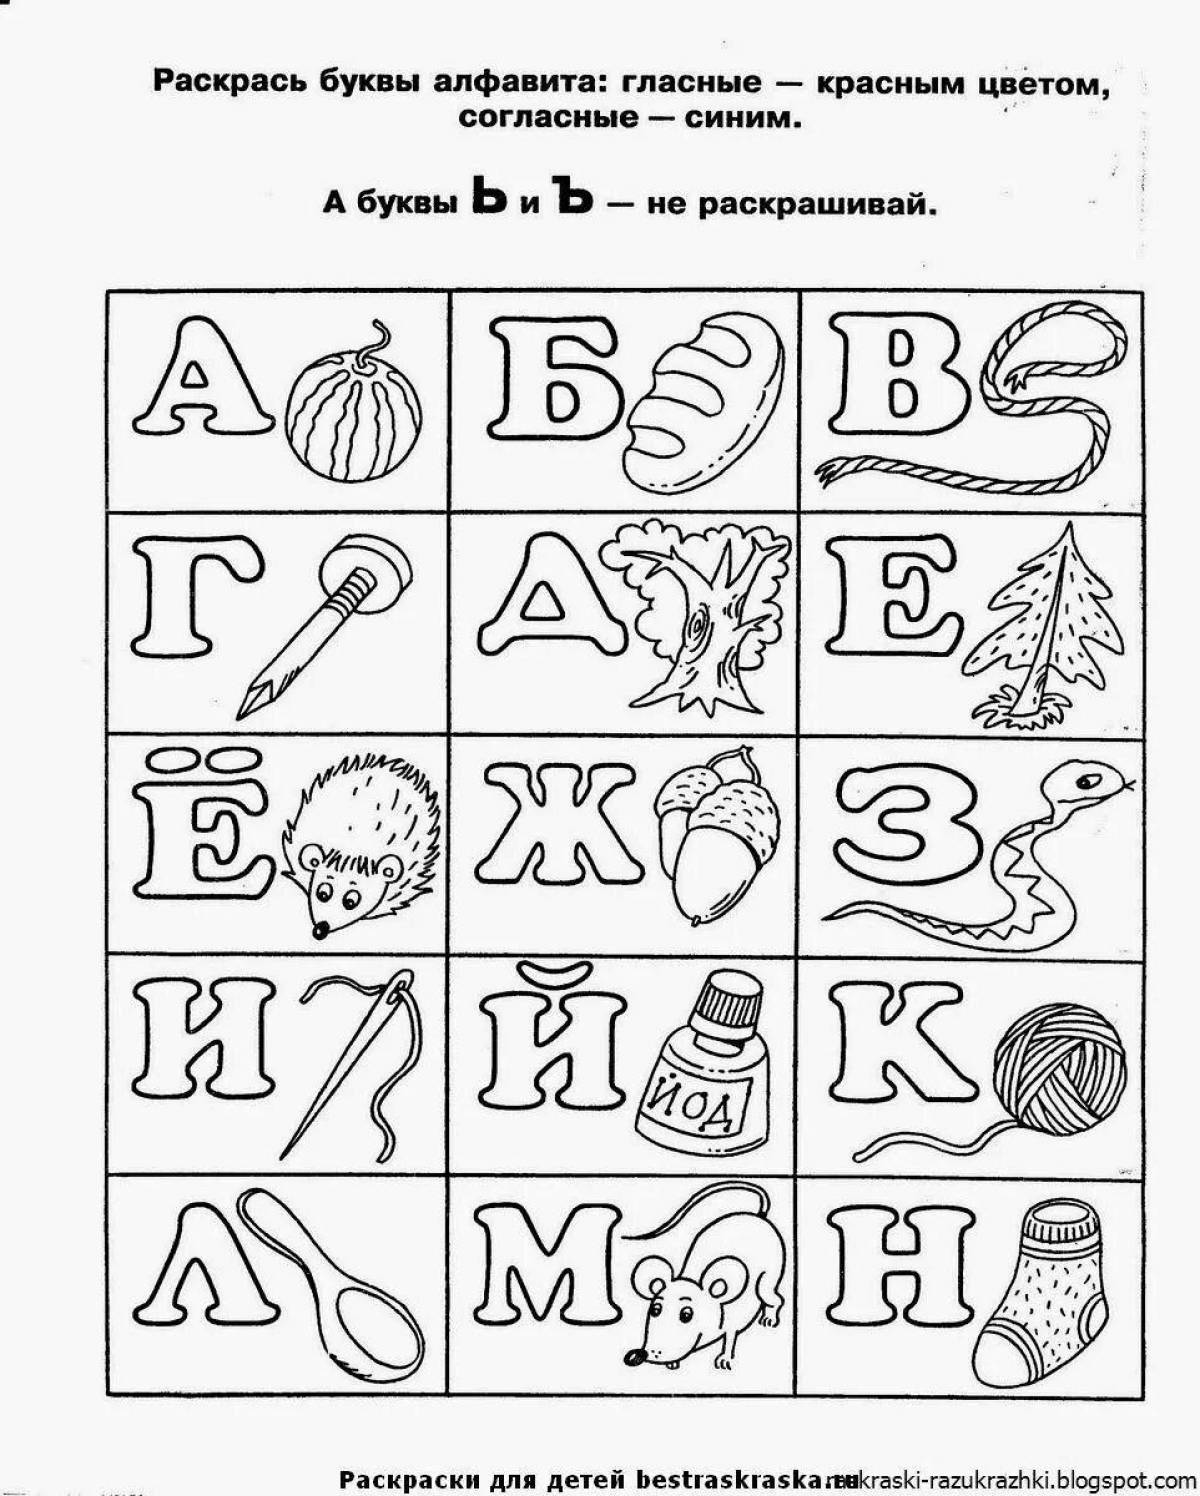 Fun vowels and consonants coloring pages